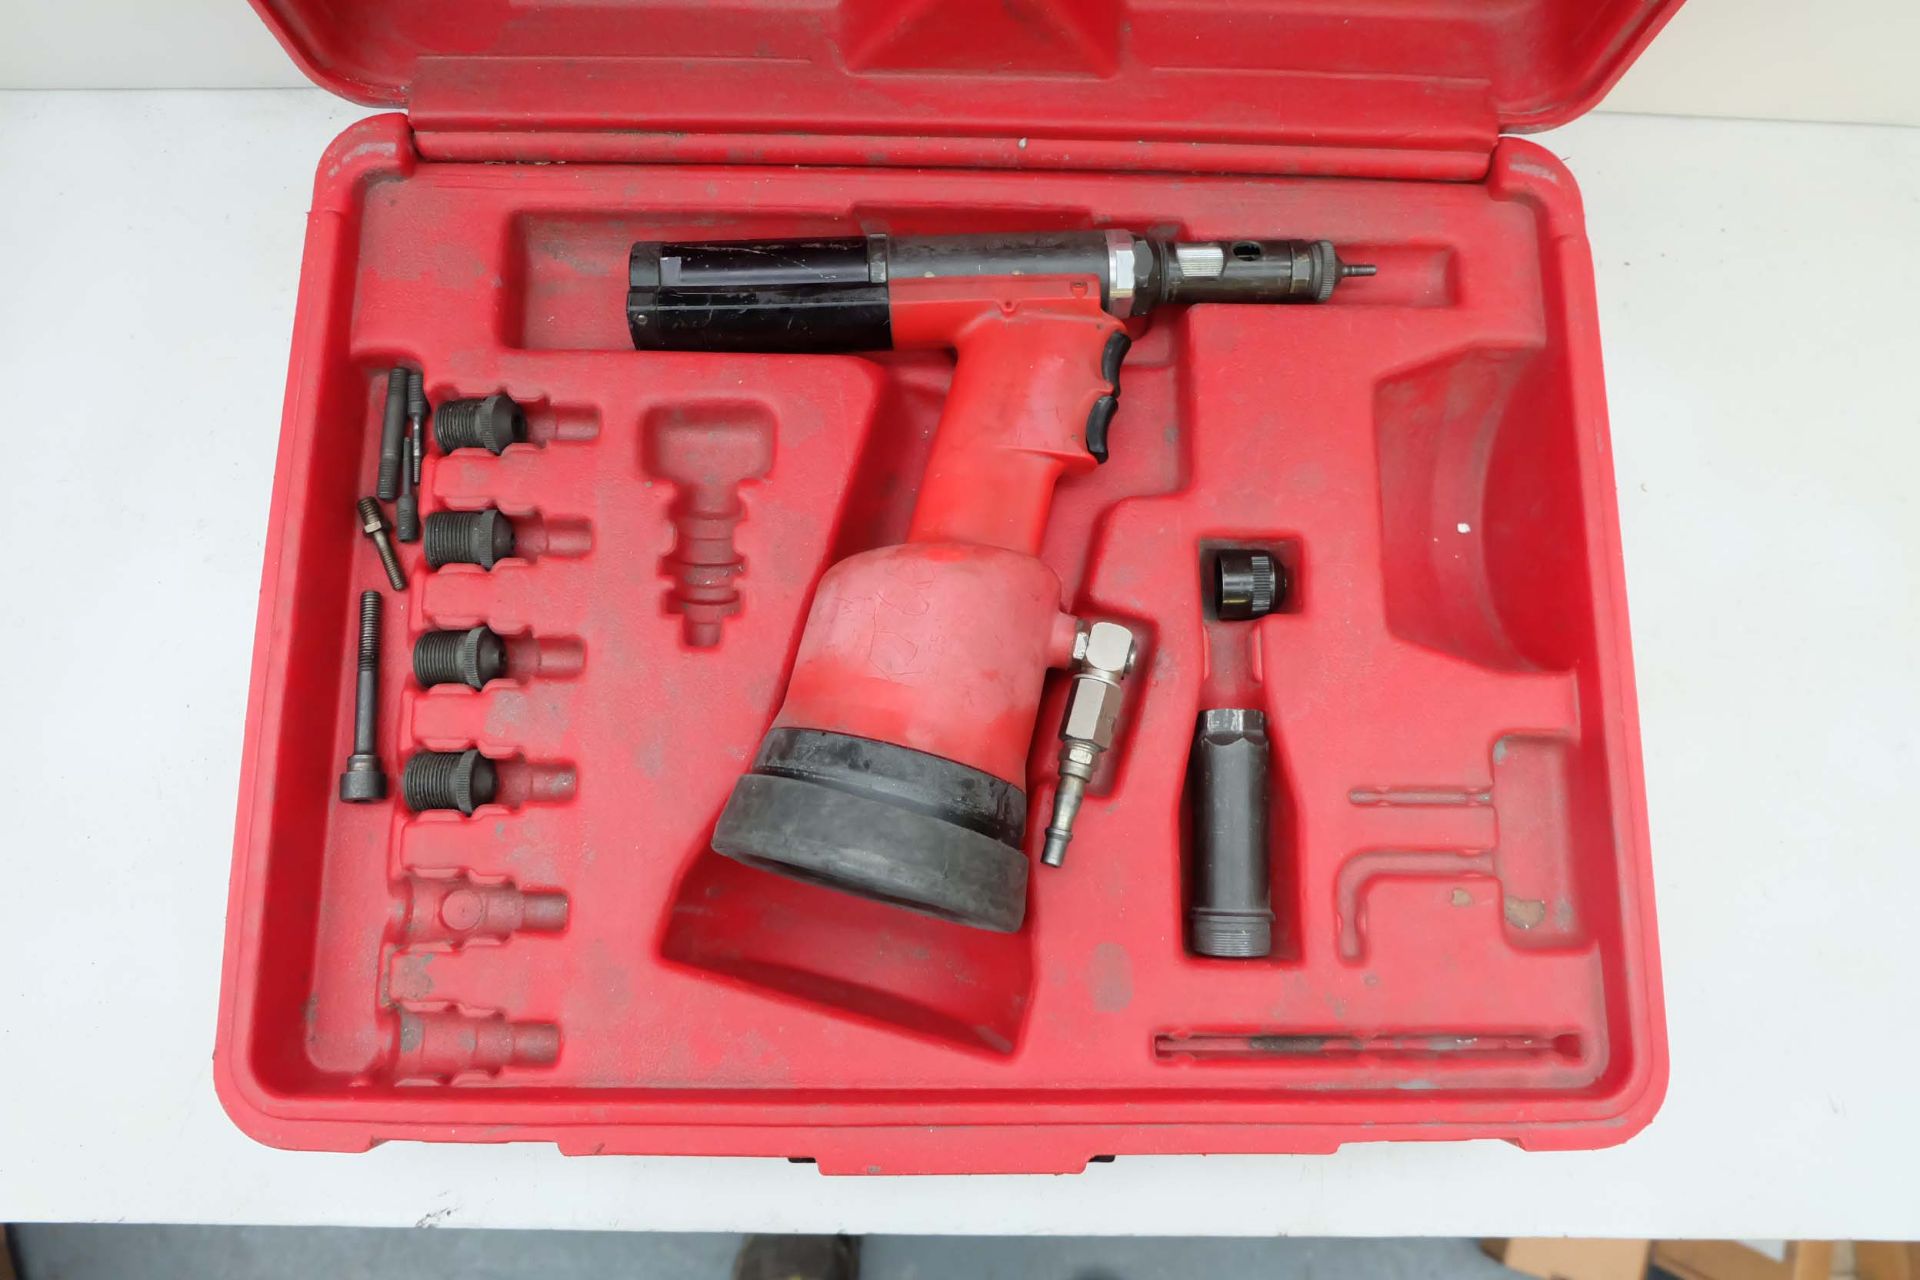 FAR Model KJ 60 Oil Pneumatic Riveting Tool for Inserts M3/M8. With Instructions & Carry Case.